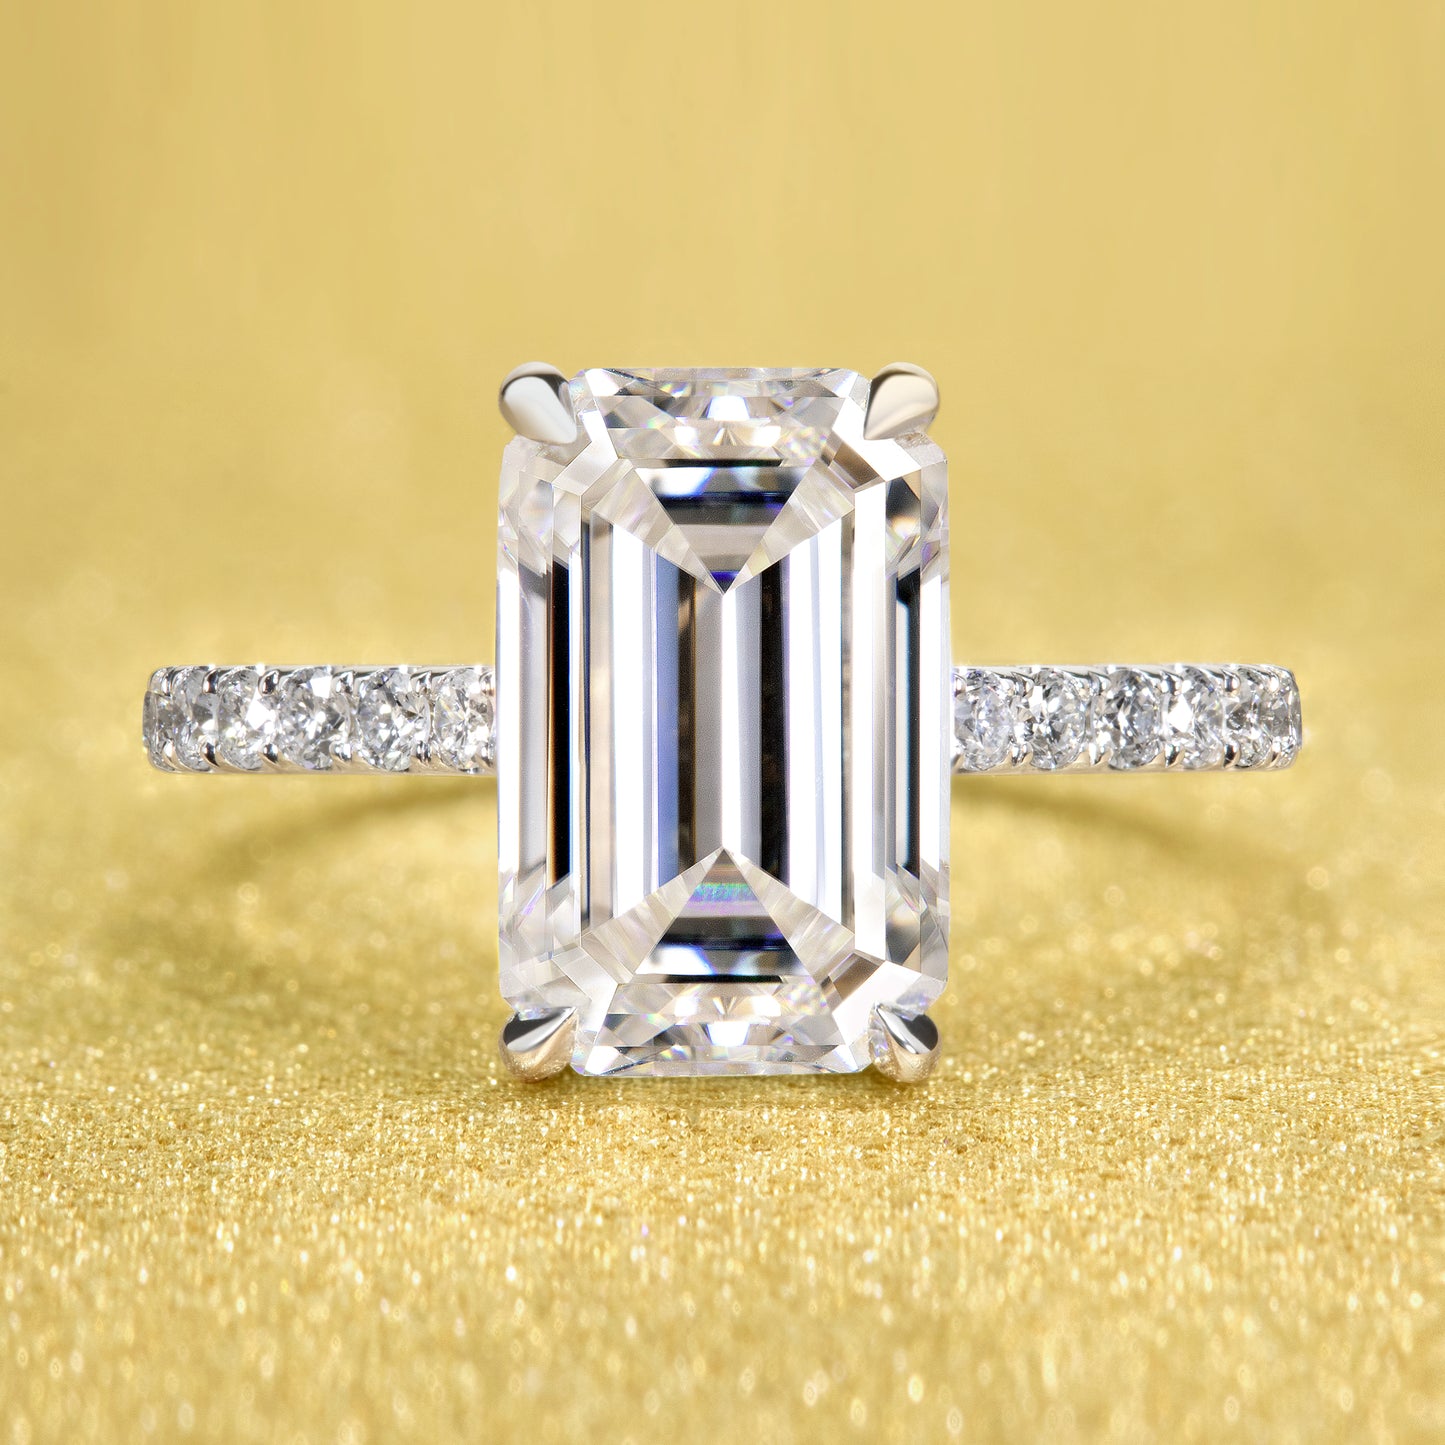 Emilia 3.5ct Elongated Emerald-cut Moissanite Diamond Bridge Hidden Halo Cathedral Style Engagement ring in 14K or 18K Gold by Earthena Jewelry